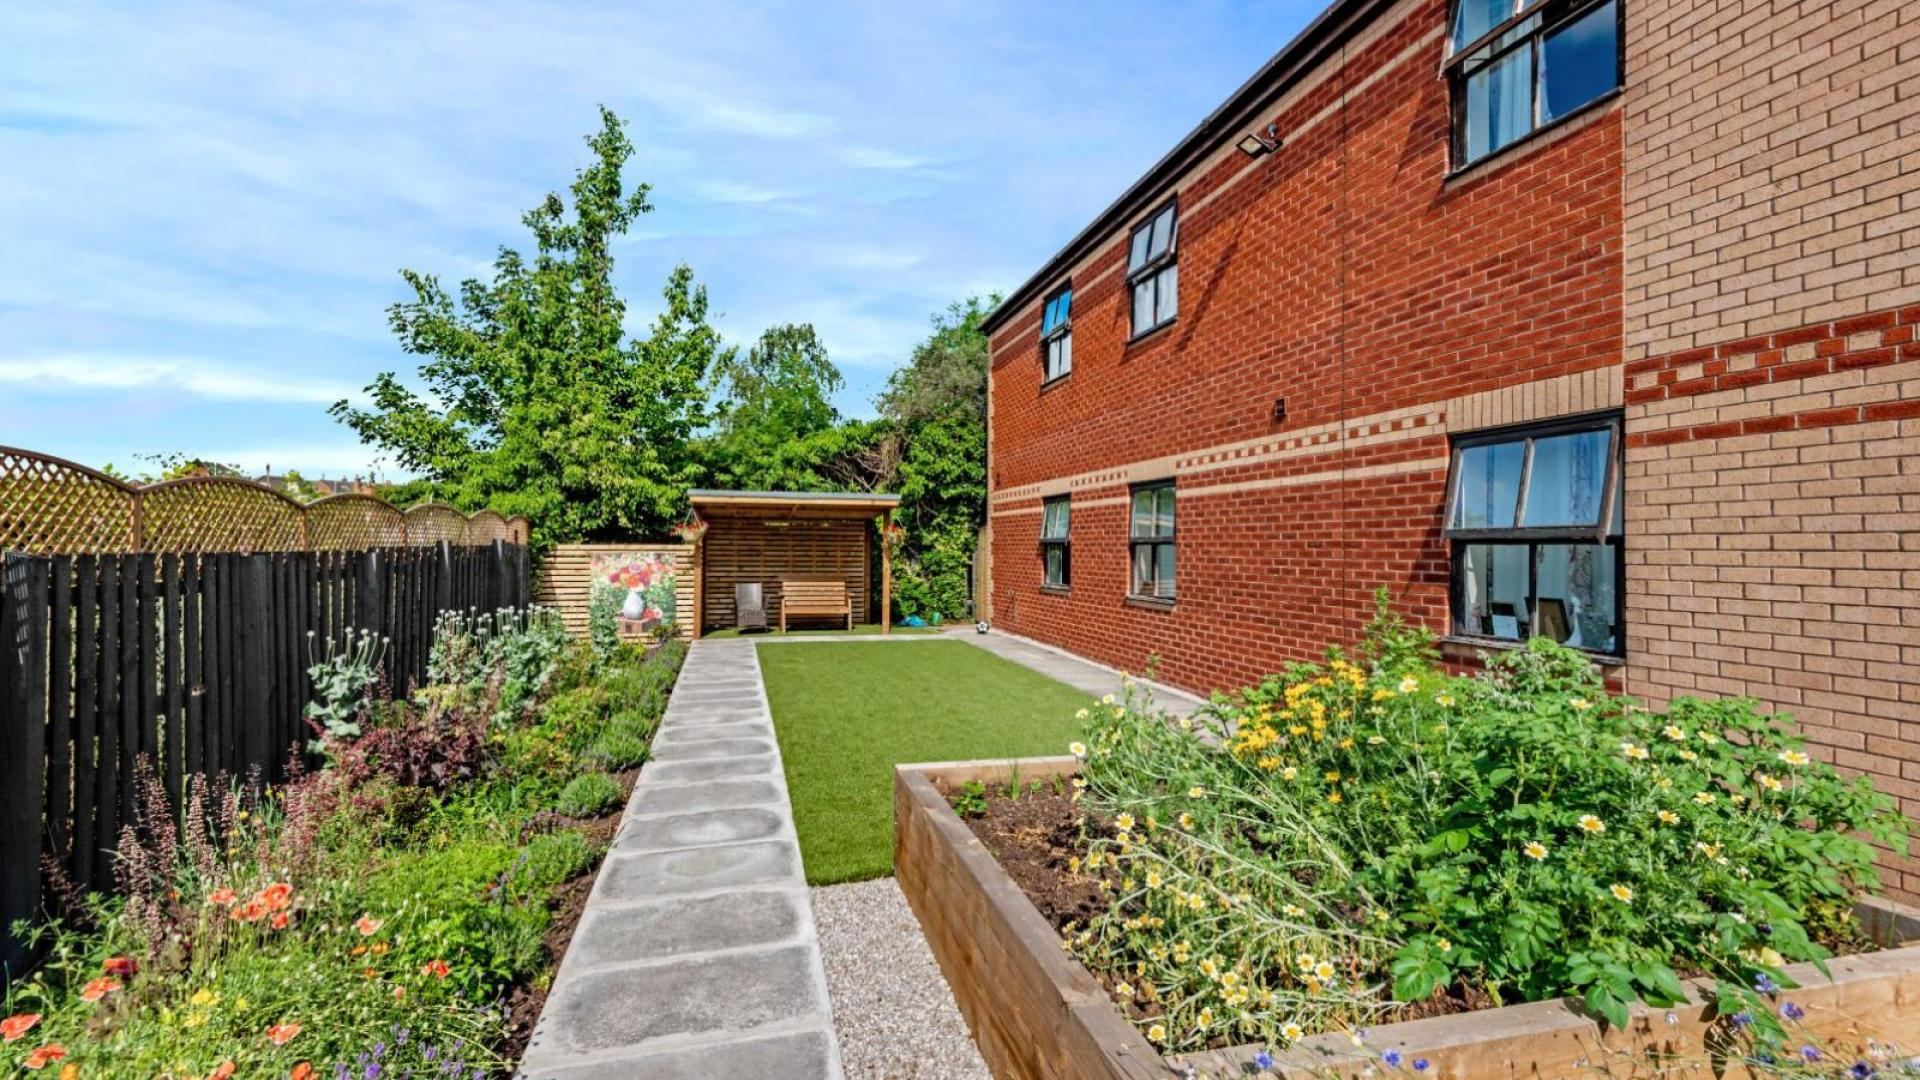 Garden area at Paisley Lodge Dementia Care Home in Leeds